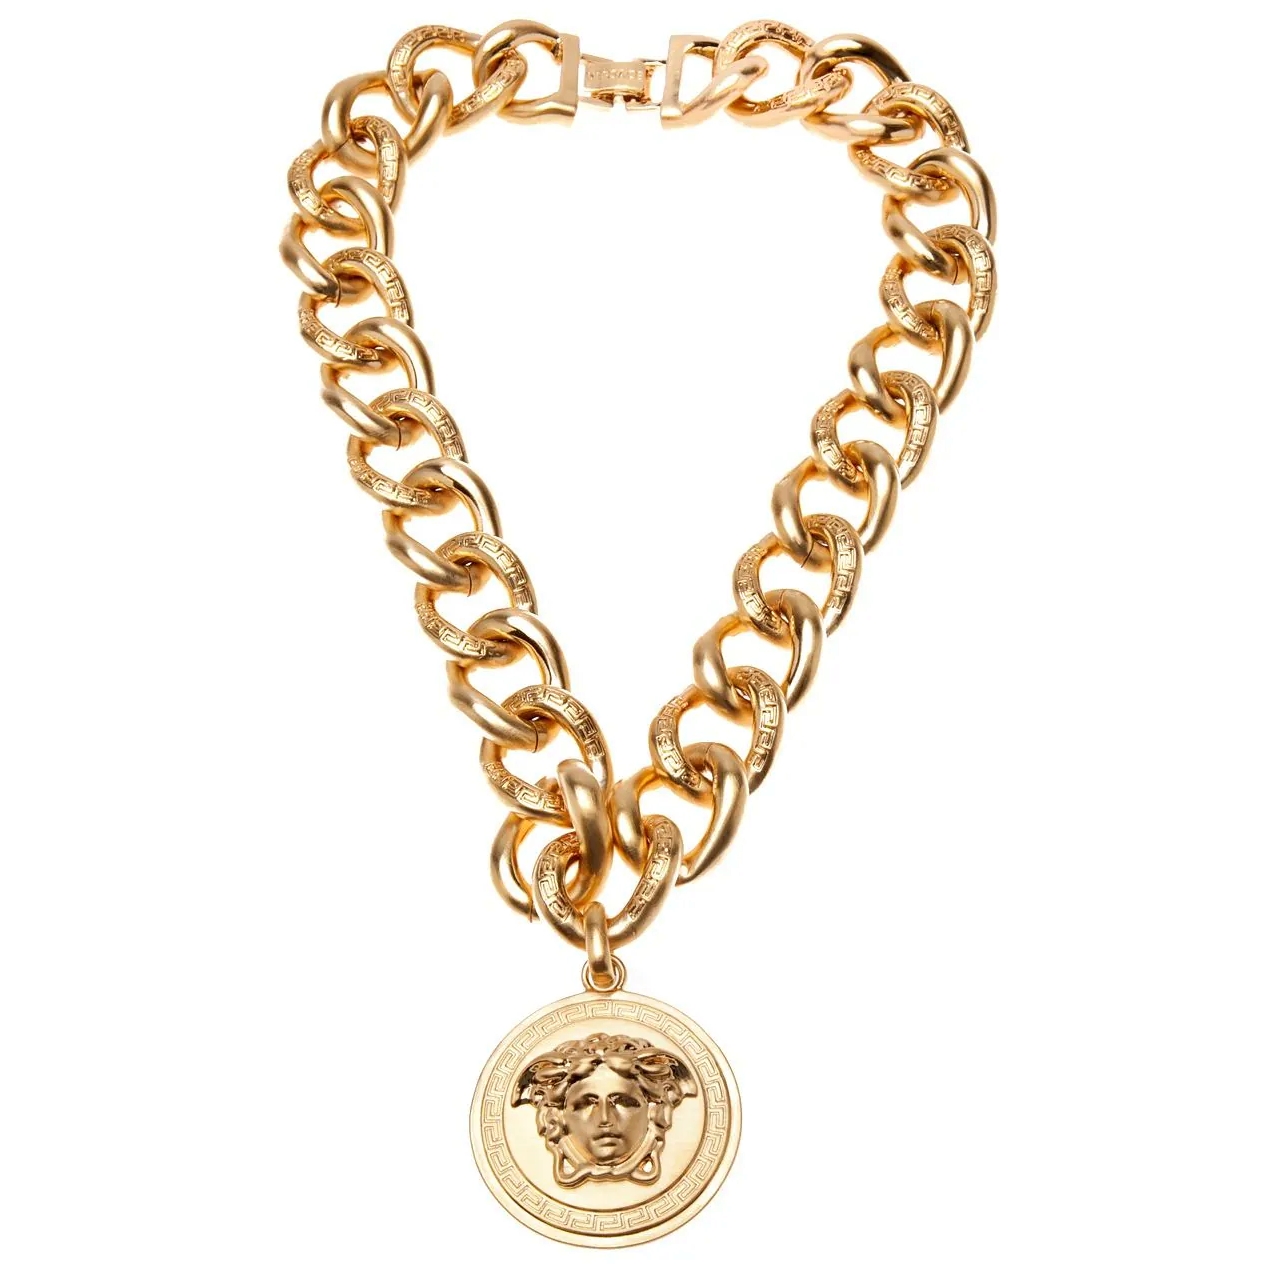 Image - Versace - 24K gold plated chain necklace.jpeg | Gagapedia ...